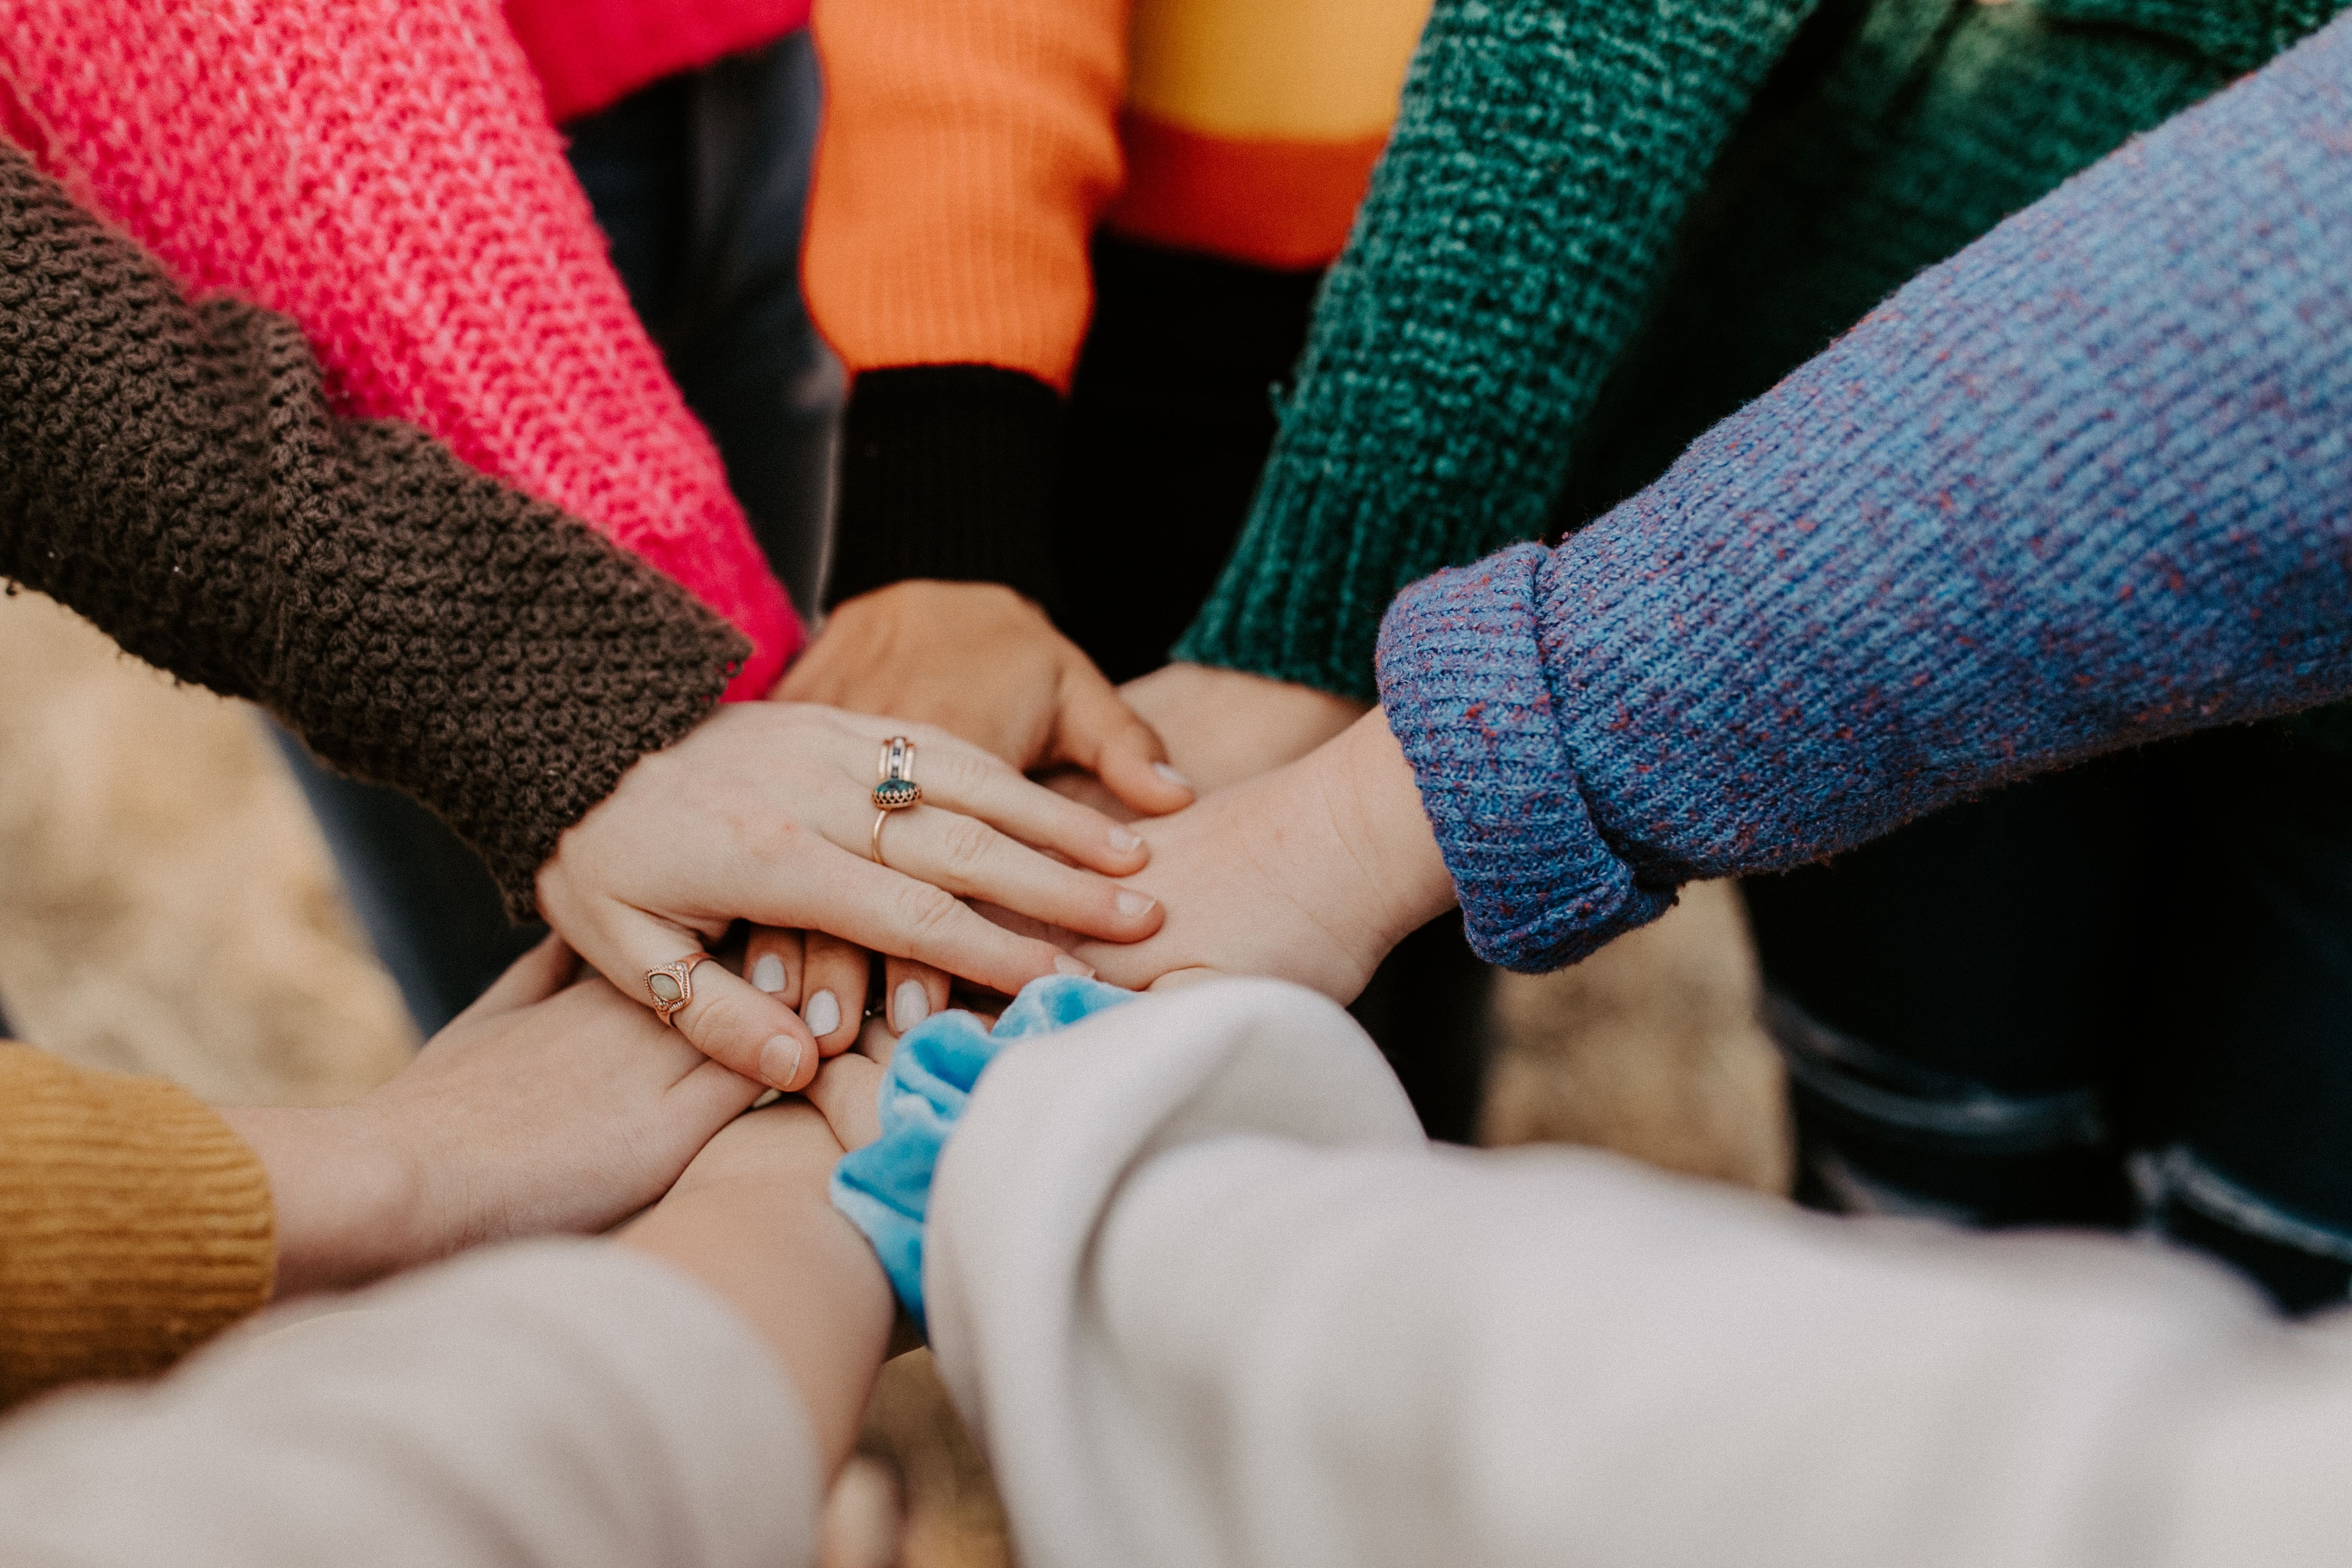 hands of diverse individuals in a huddle